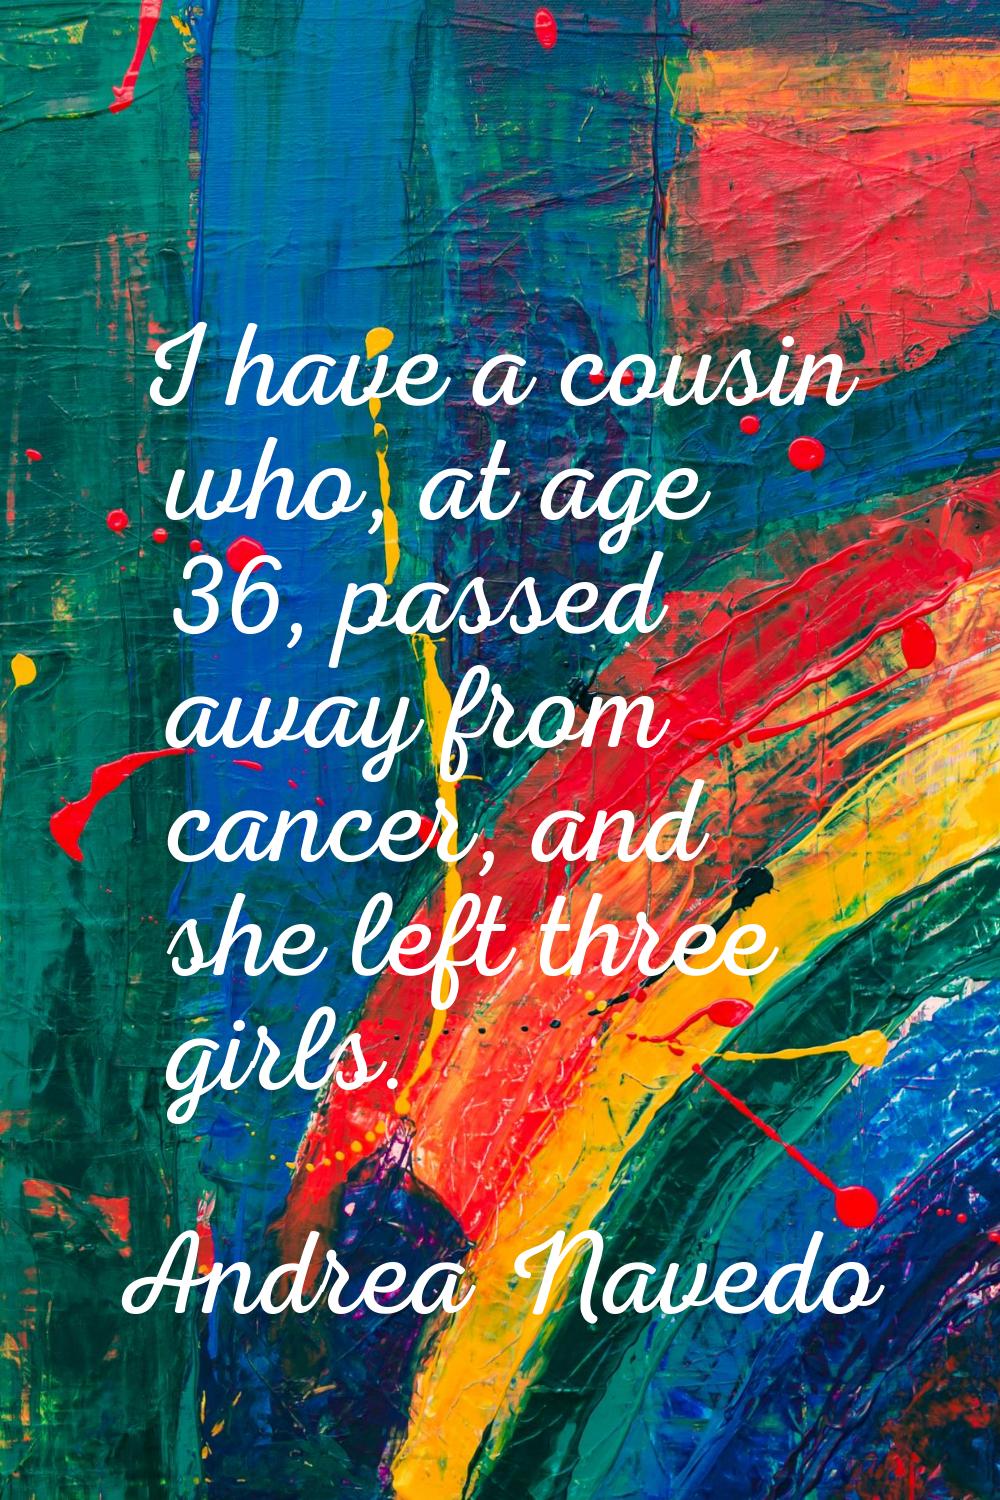 I have a cousin who, at age 36, passed away from cancer, and she left three girls.